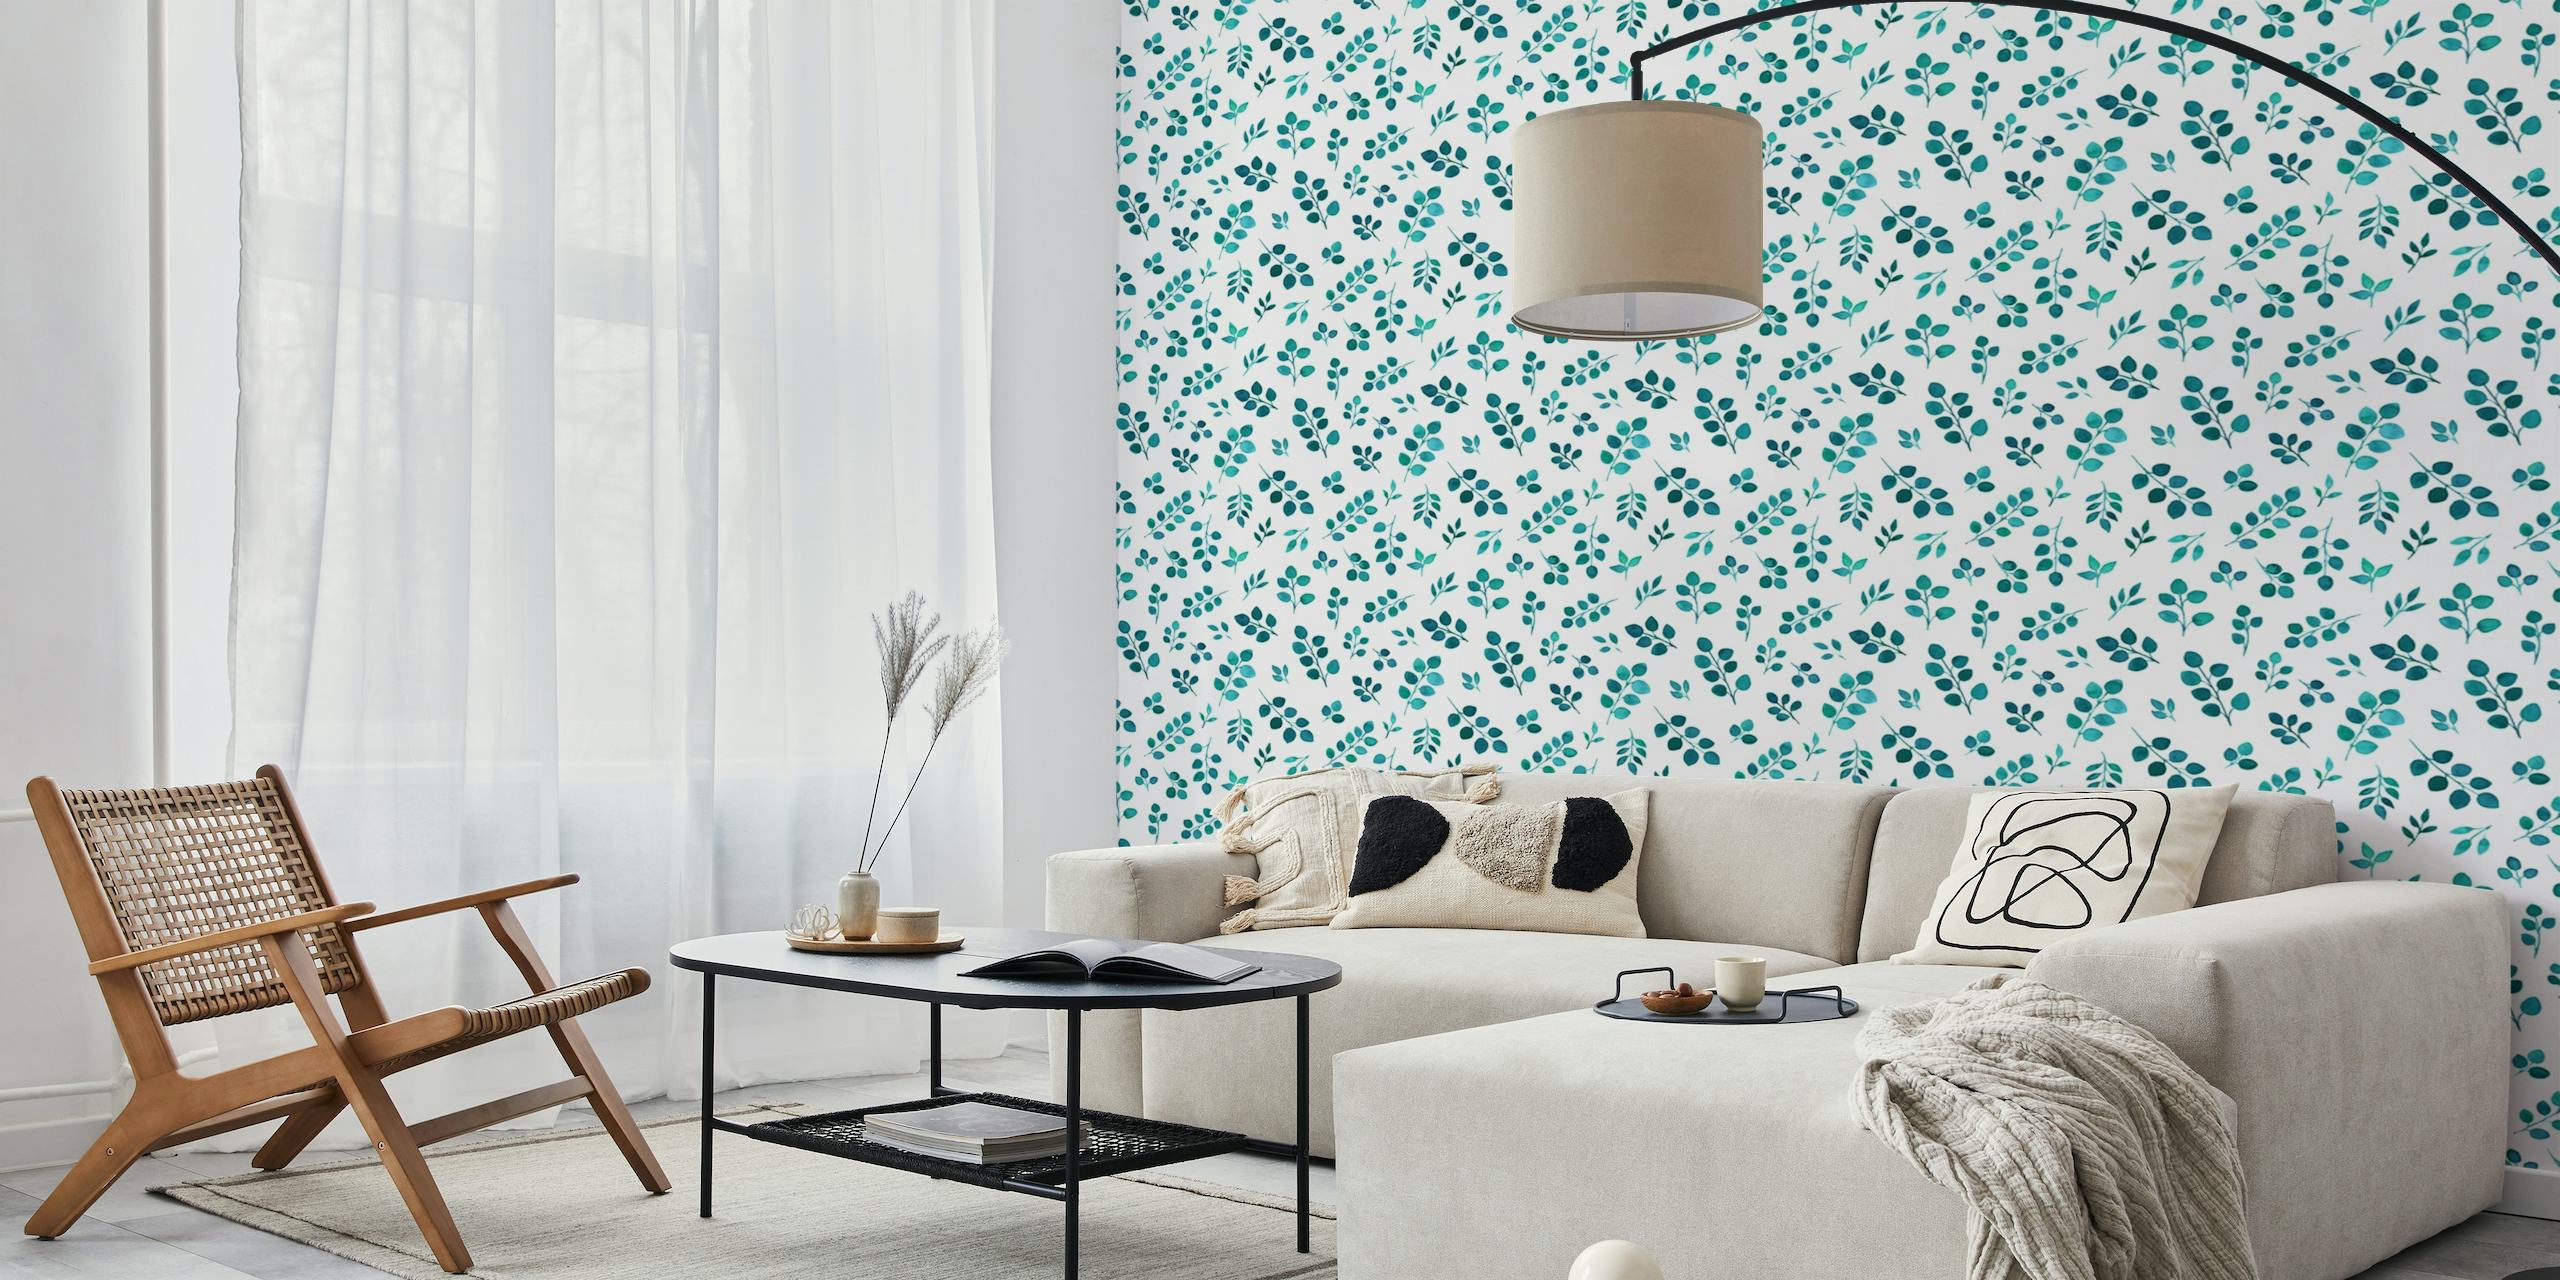 Green and white leaf pattern wall mural named Petites Feuilles - Green